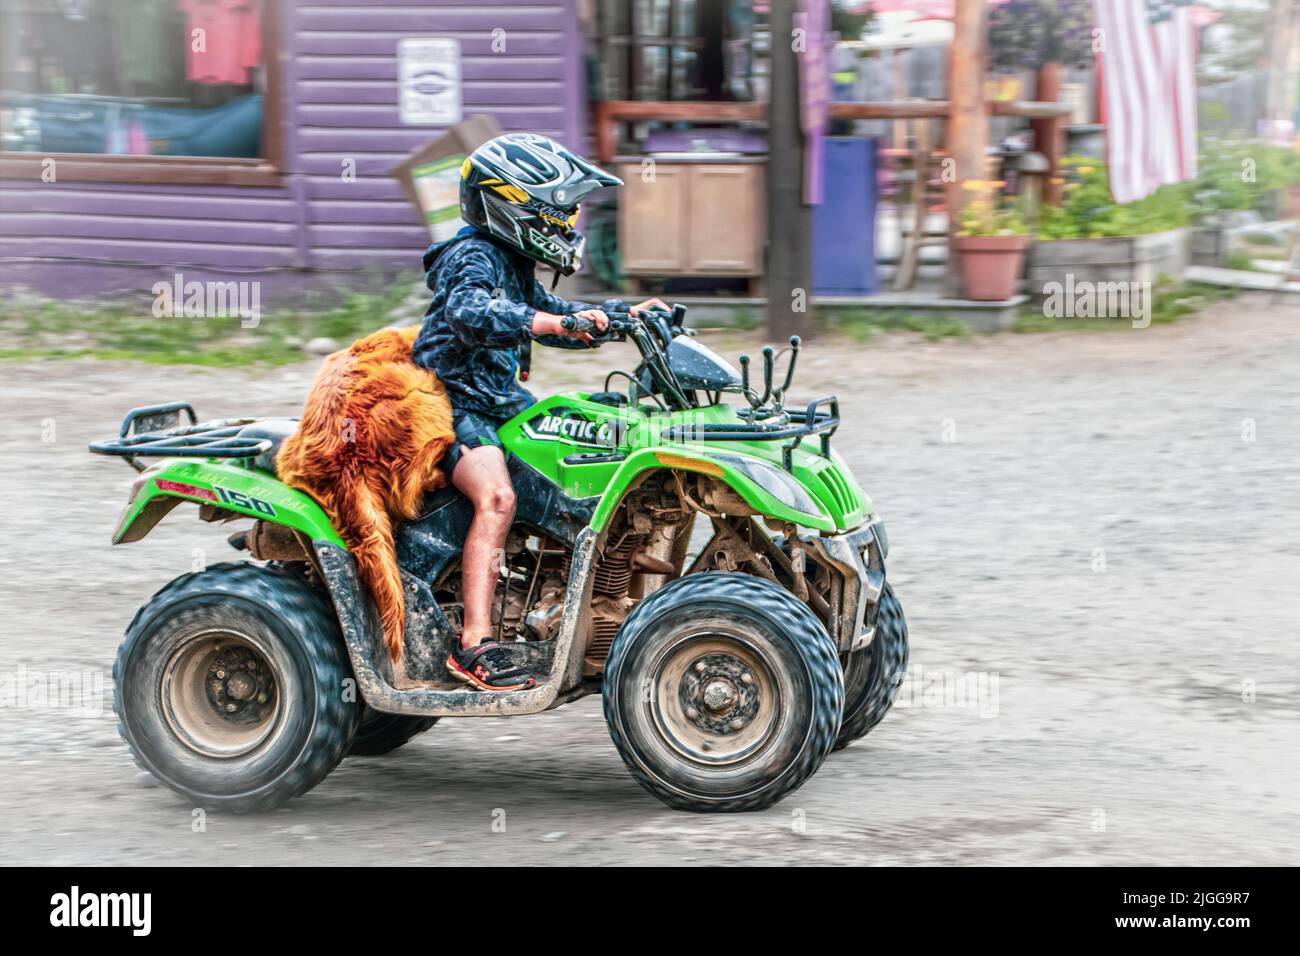 06-26-2002 Talkeetna Alaska USA - Child in helmet  drdivng green four wheeler with dog draped across back of seat in the funky little frontier town of Stock Photo